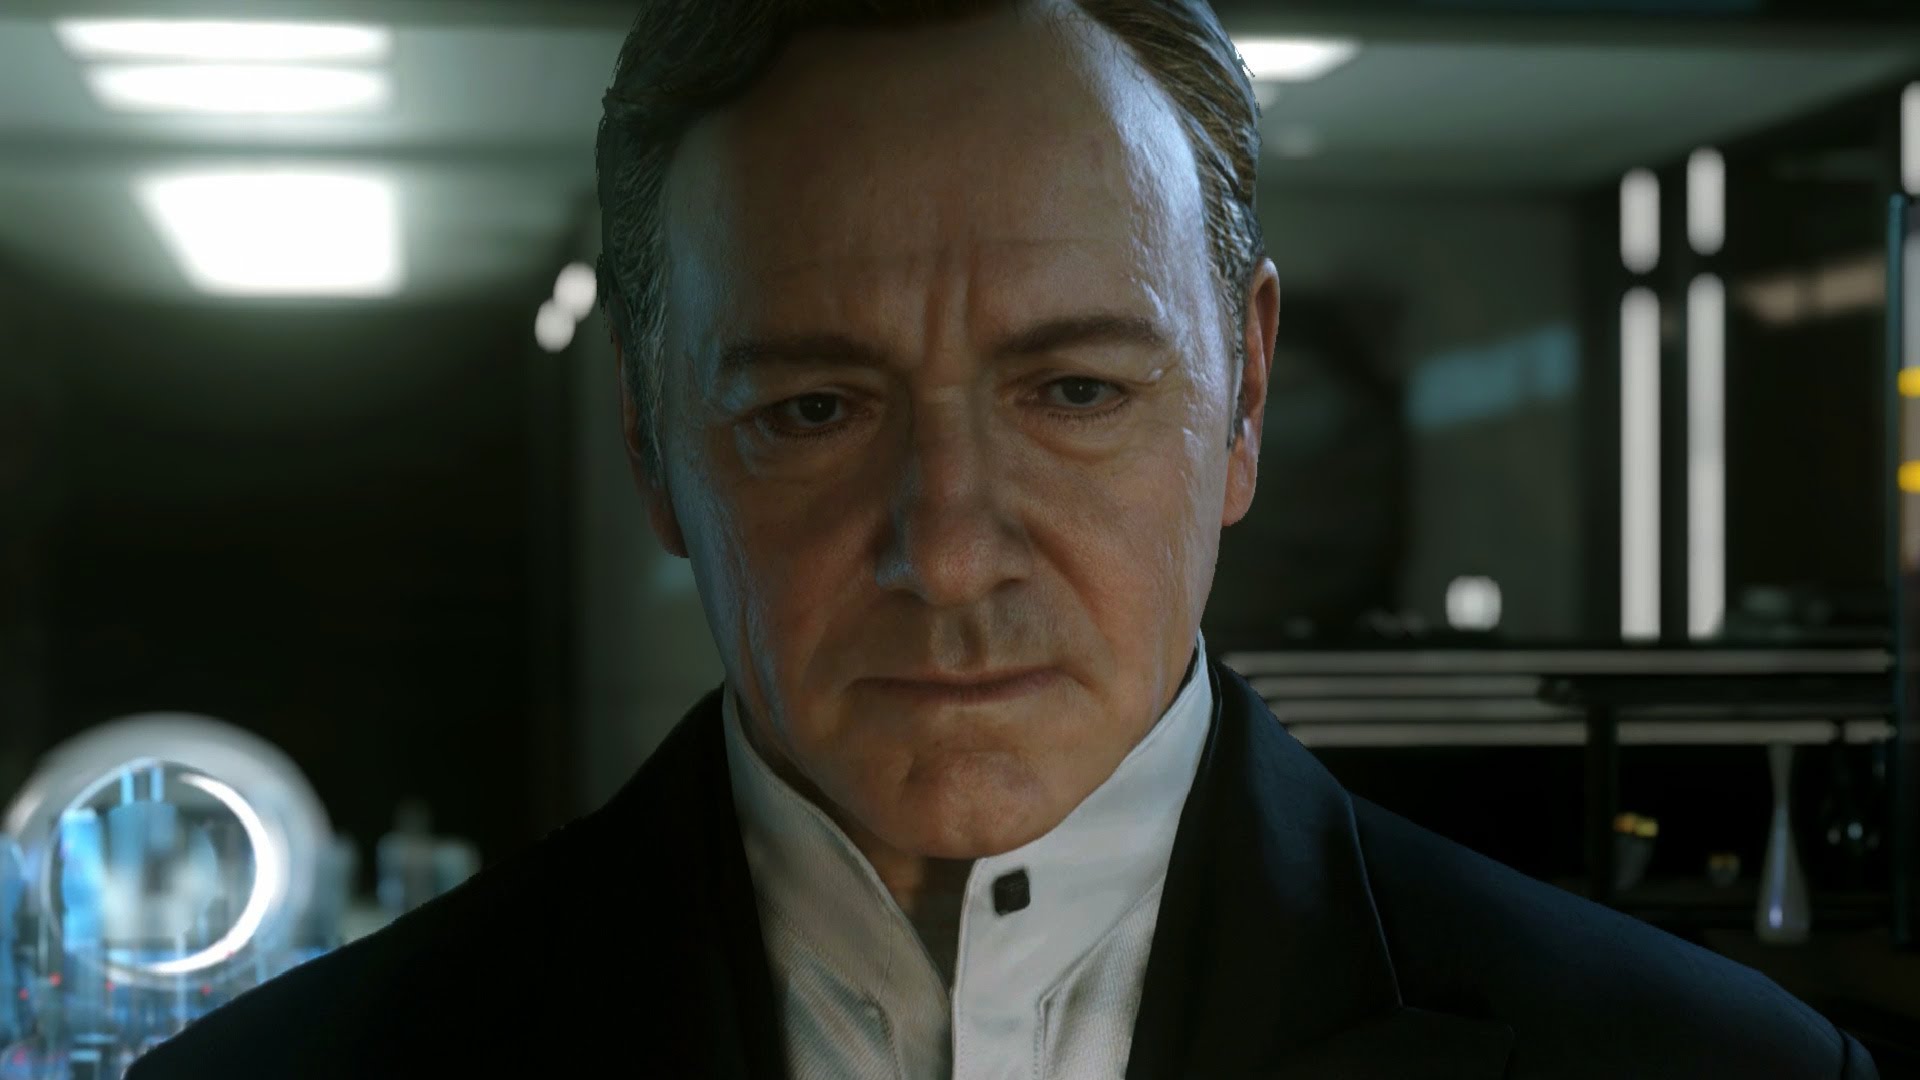 Call of Duty: Advanced Warfare Reveal Trailer Analysis - Weapons